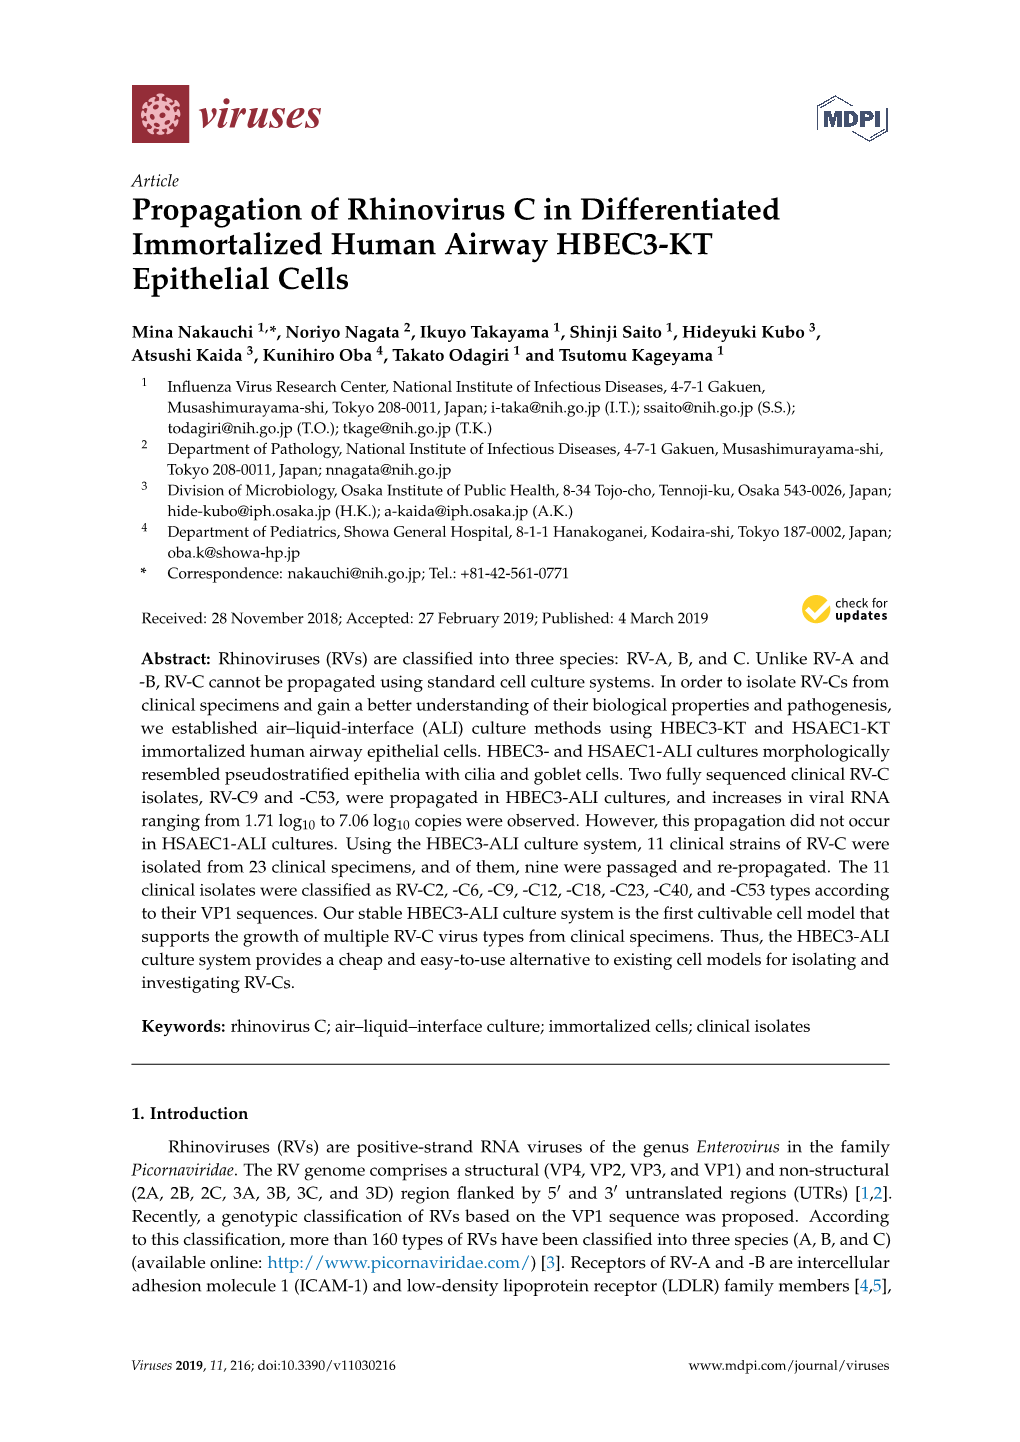 Propagation of Rhinovirus C in Differentiated Immortalized Human Airway HBEC3-KT Epithelial Cells